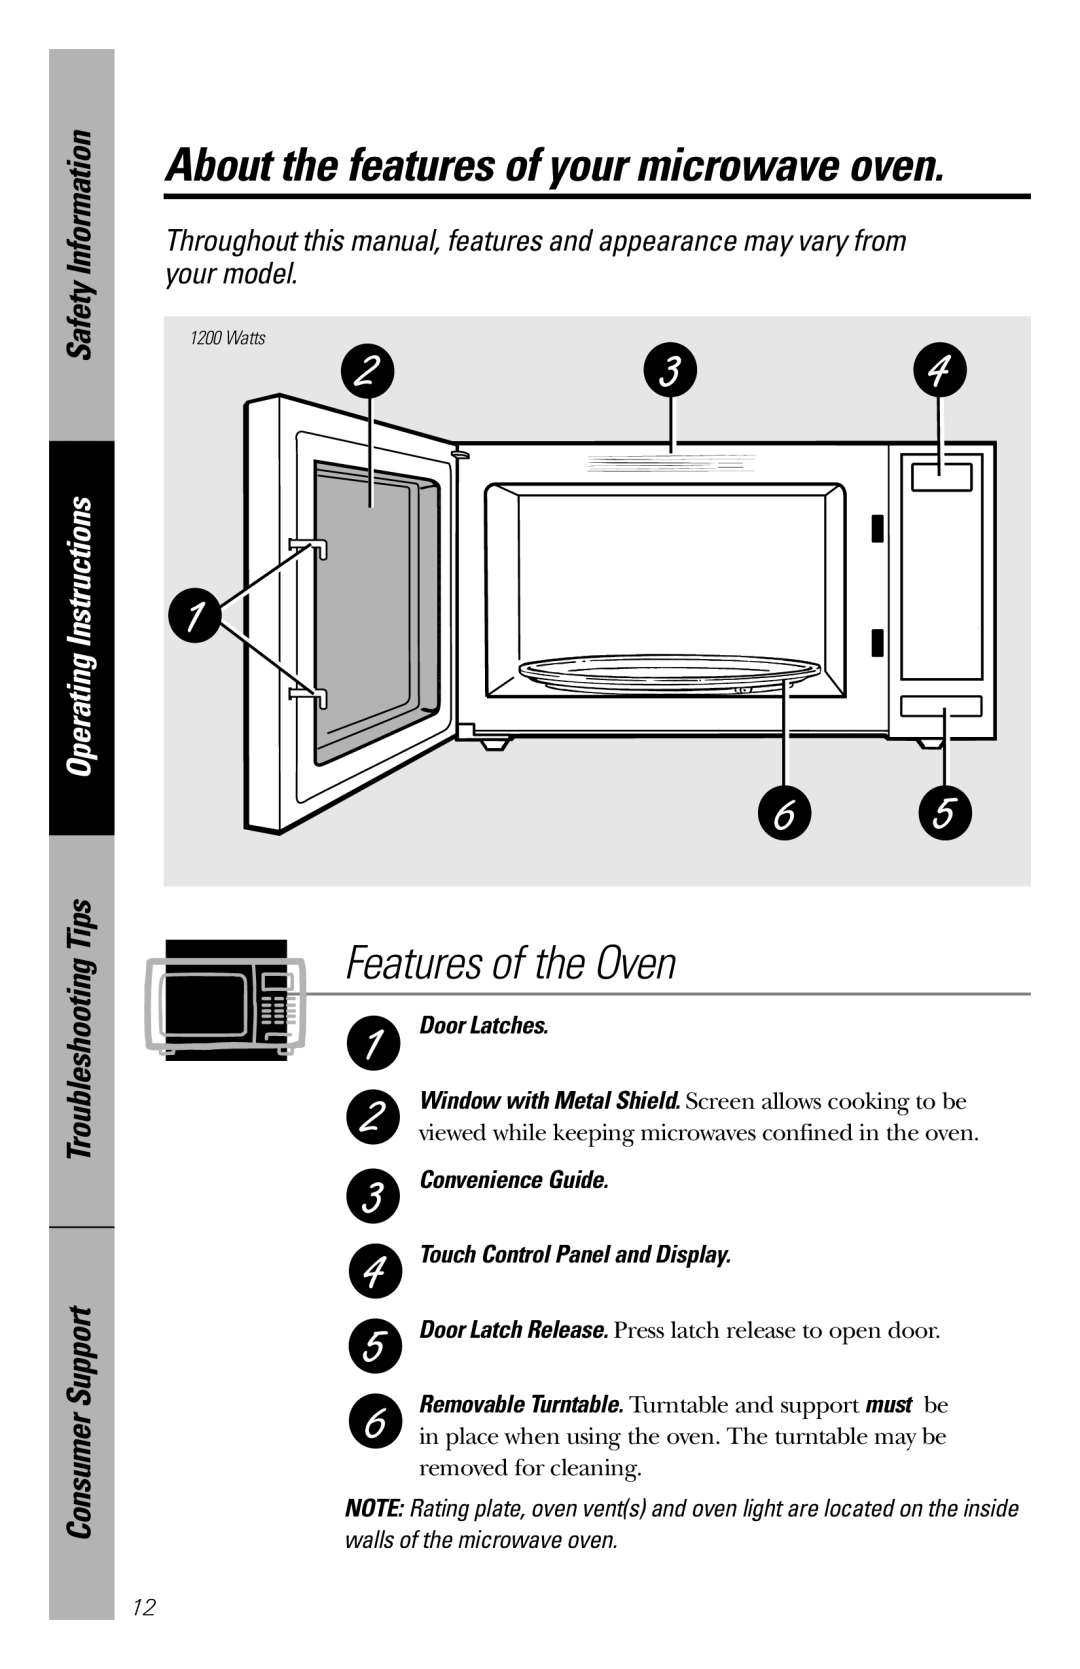 GE JES1358 Features of the Oven, Safety Information, Operating Instructions, Troubleshooting Tips Consumer Support 